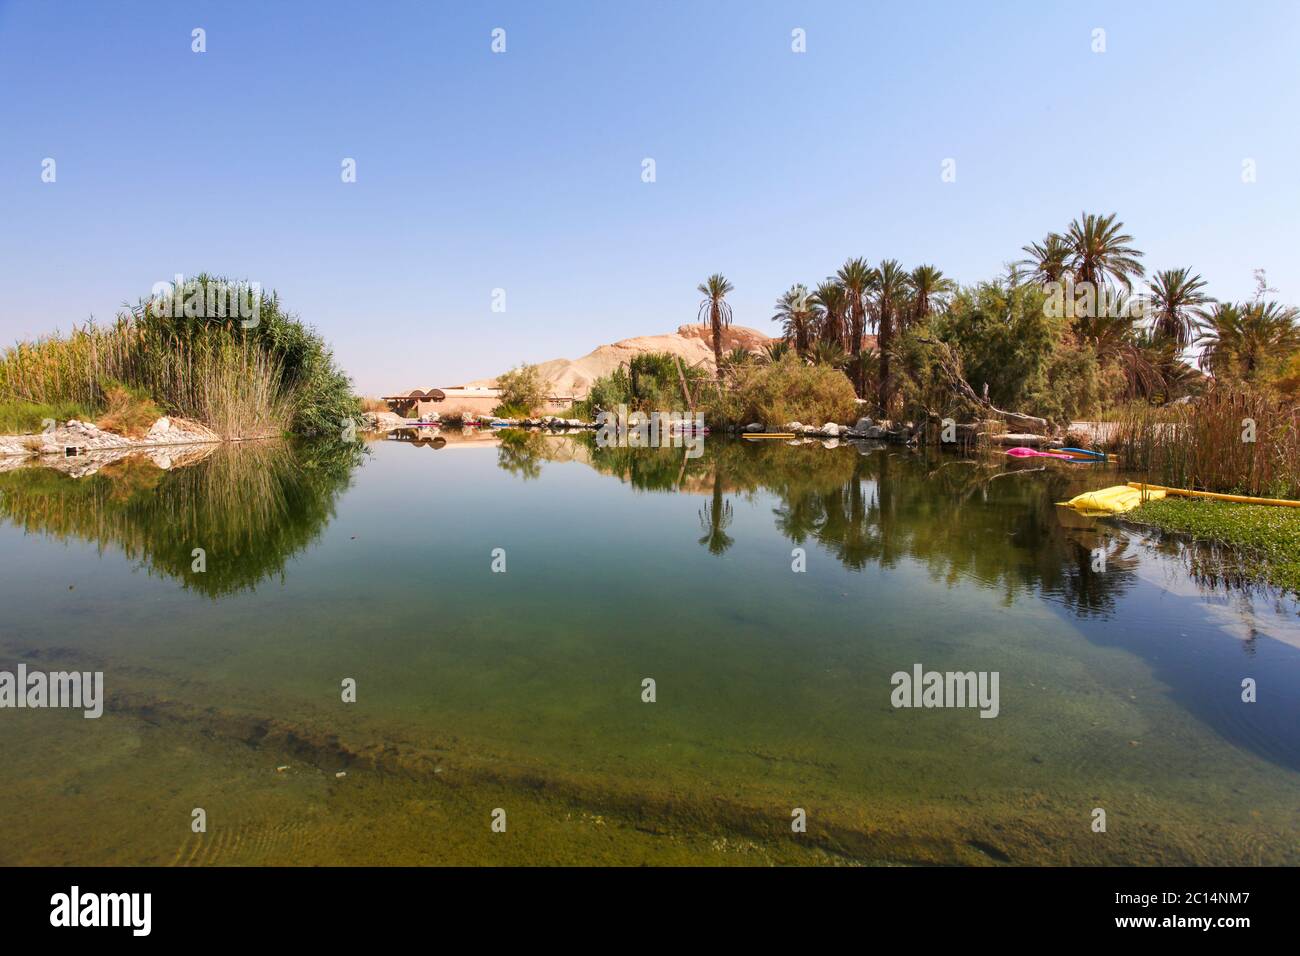 Water pool in a desert Oasis. Photographed in the Negev Desert, Israel Stock Photo